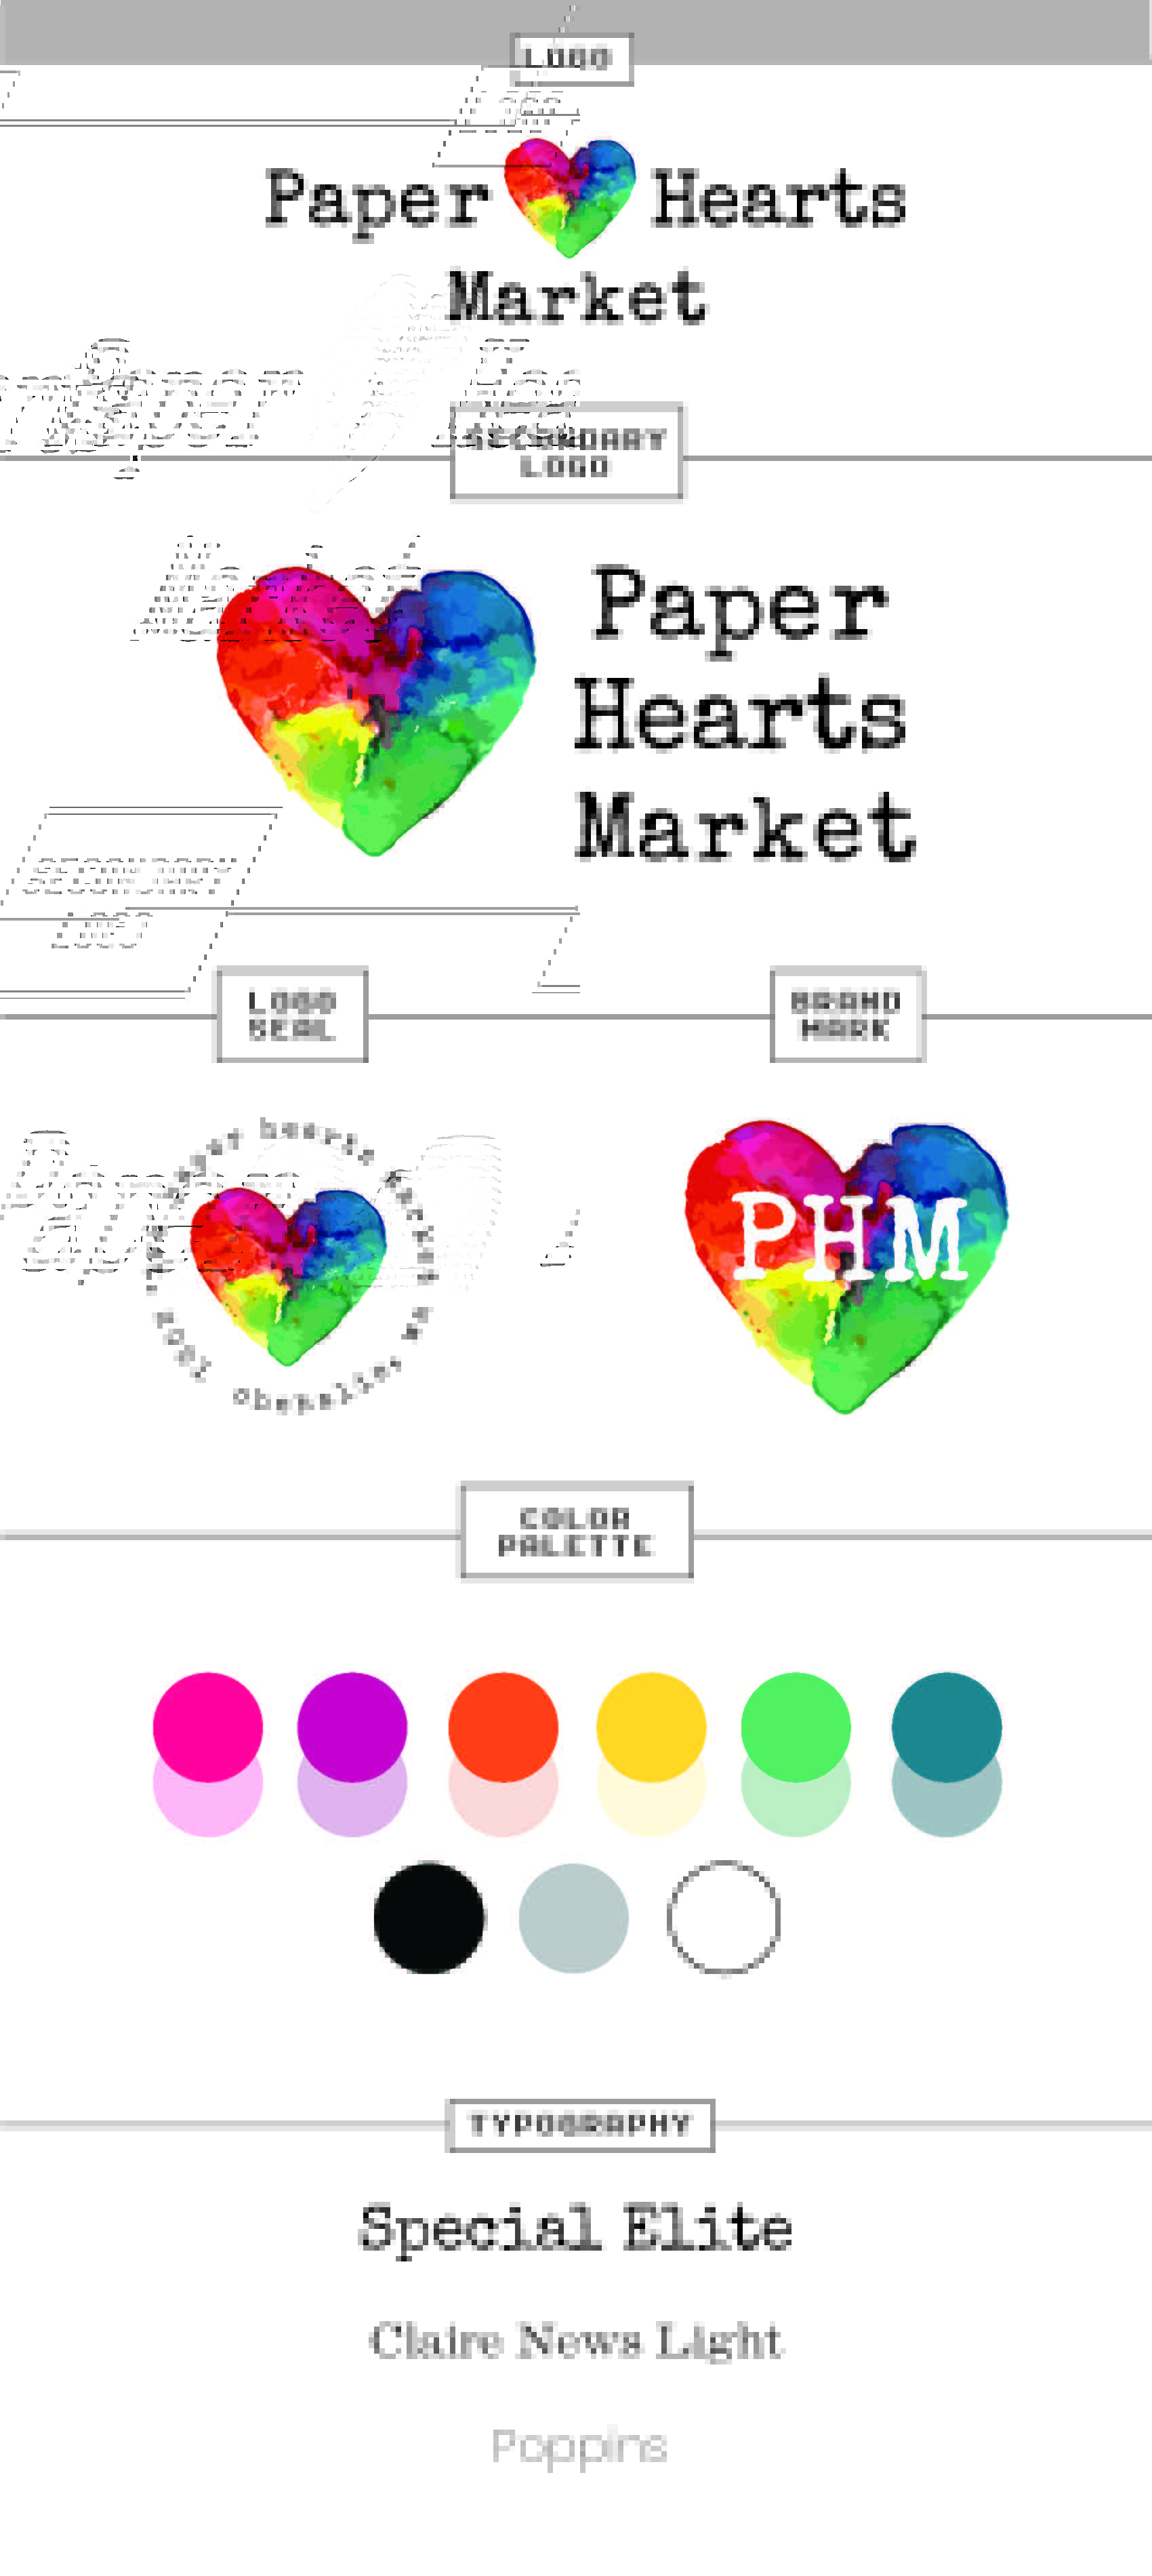 brand board for Paper Hearts Market that includes logos, brand marks, color palette, and typography